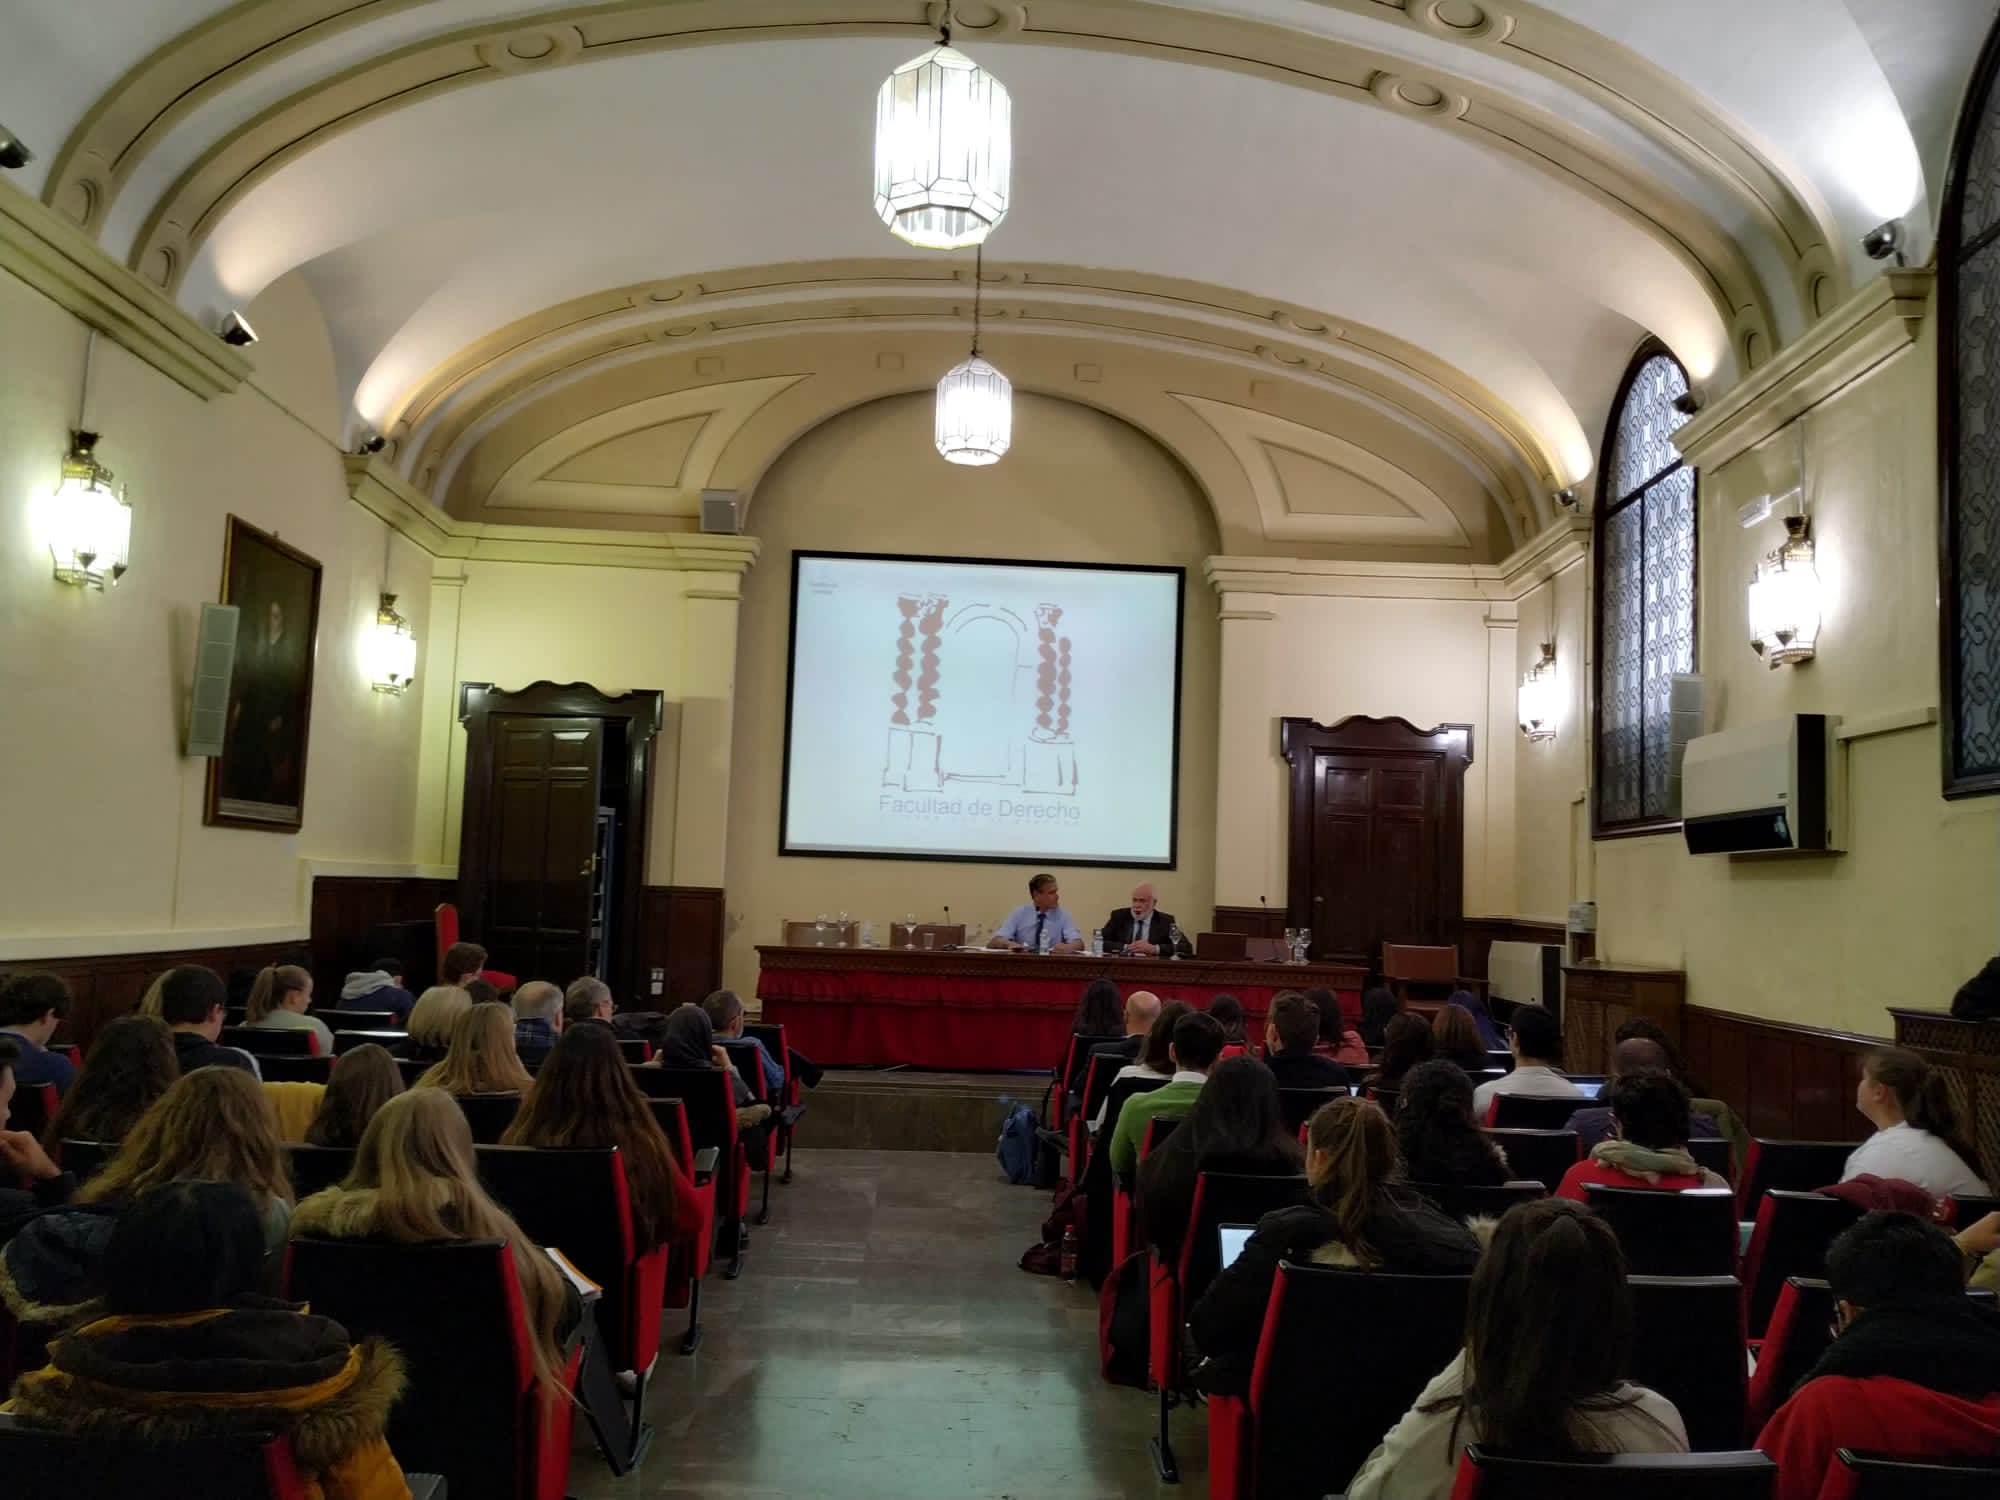 Image taken from the back of the room in which you can see the intervention of Professor López Aguilar in the conference